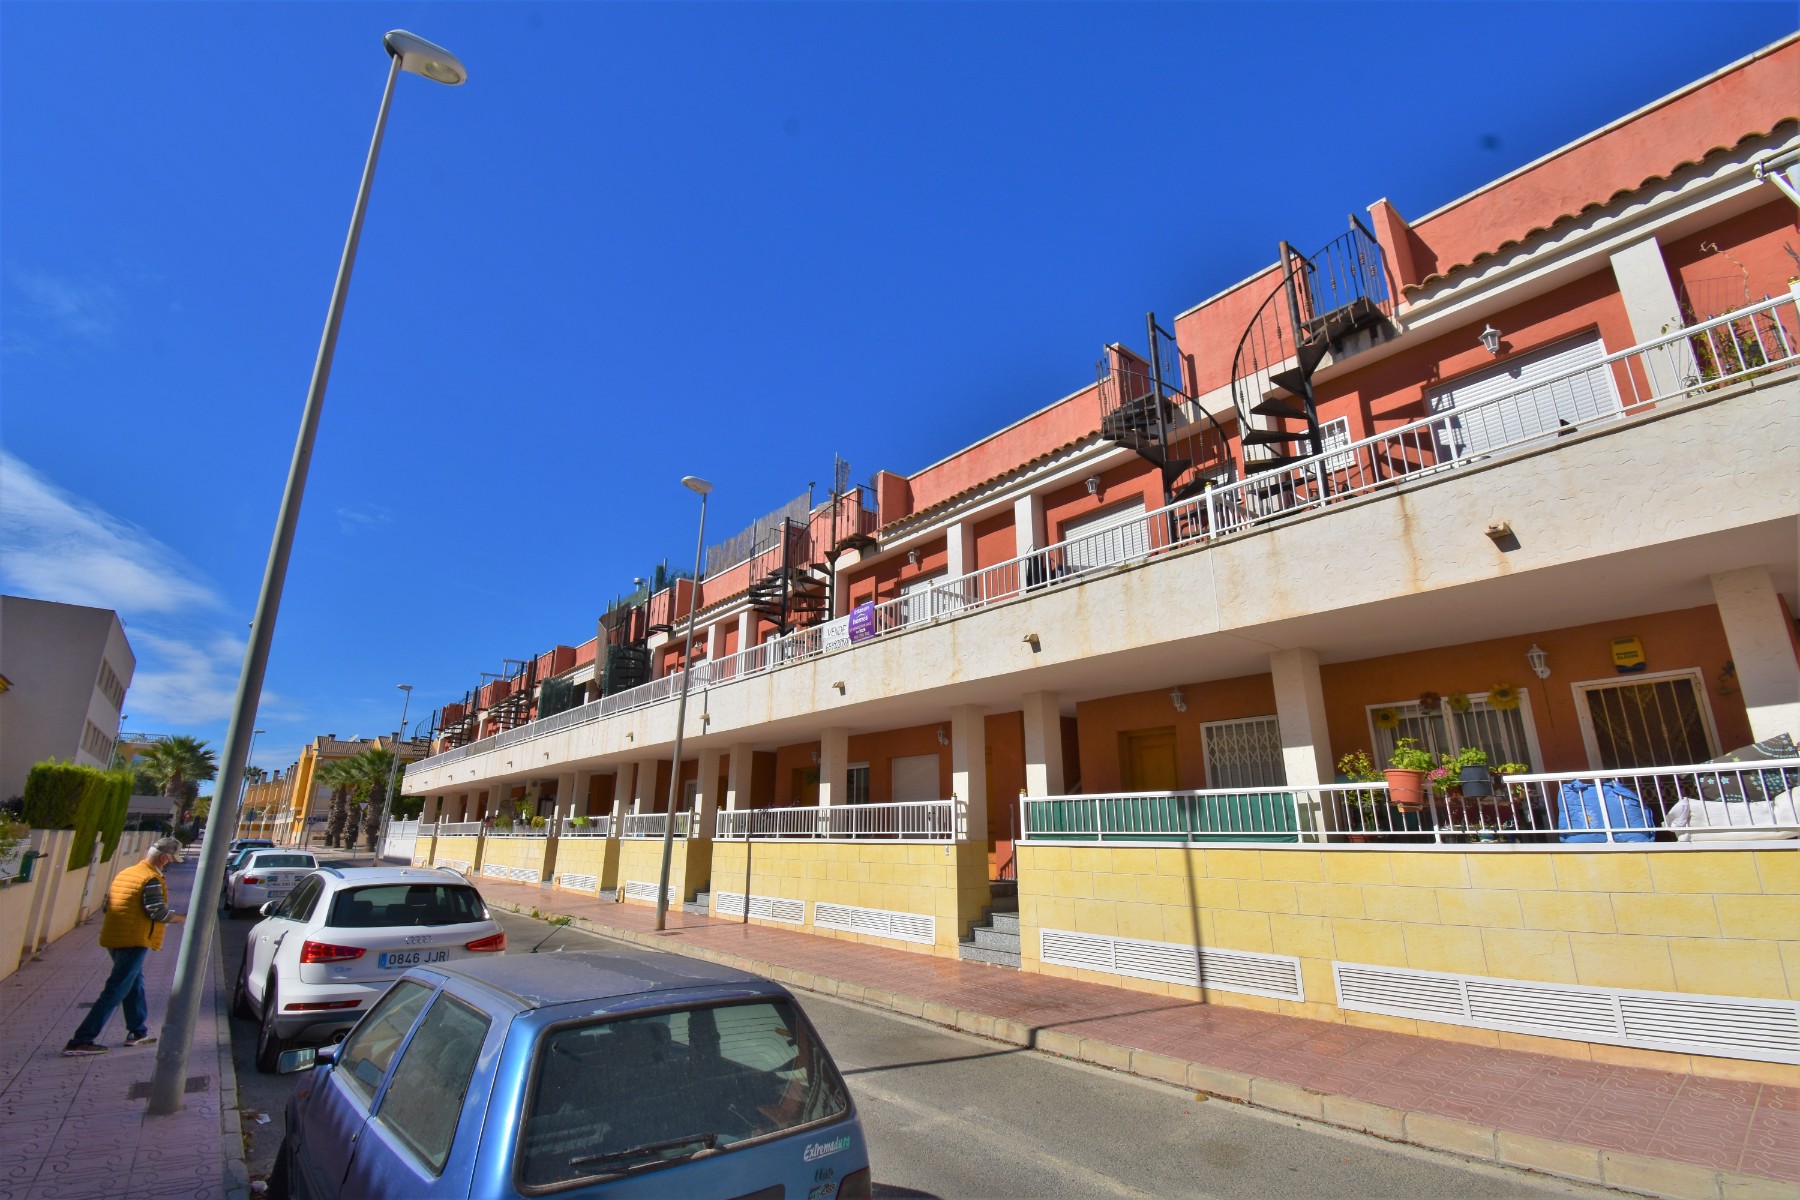 2 bedroom apartment / flat for sale in Rojales, Costa Blanca